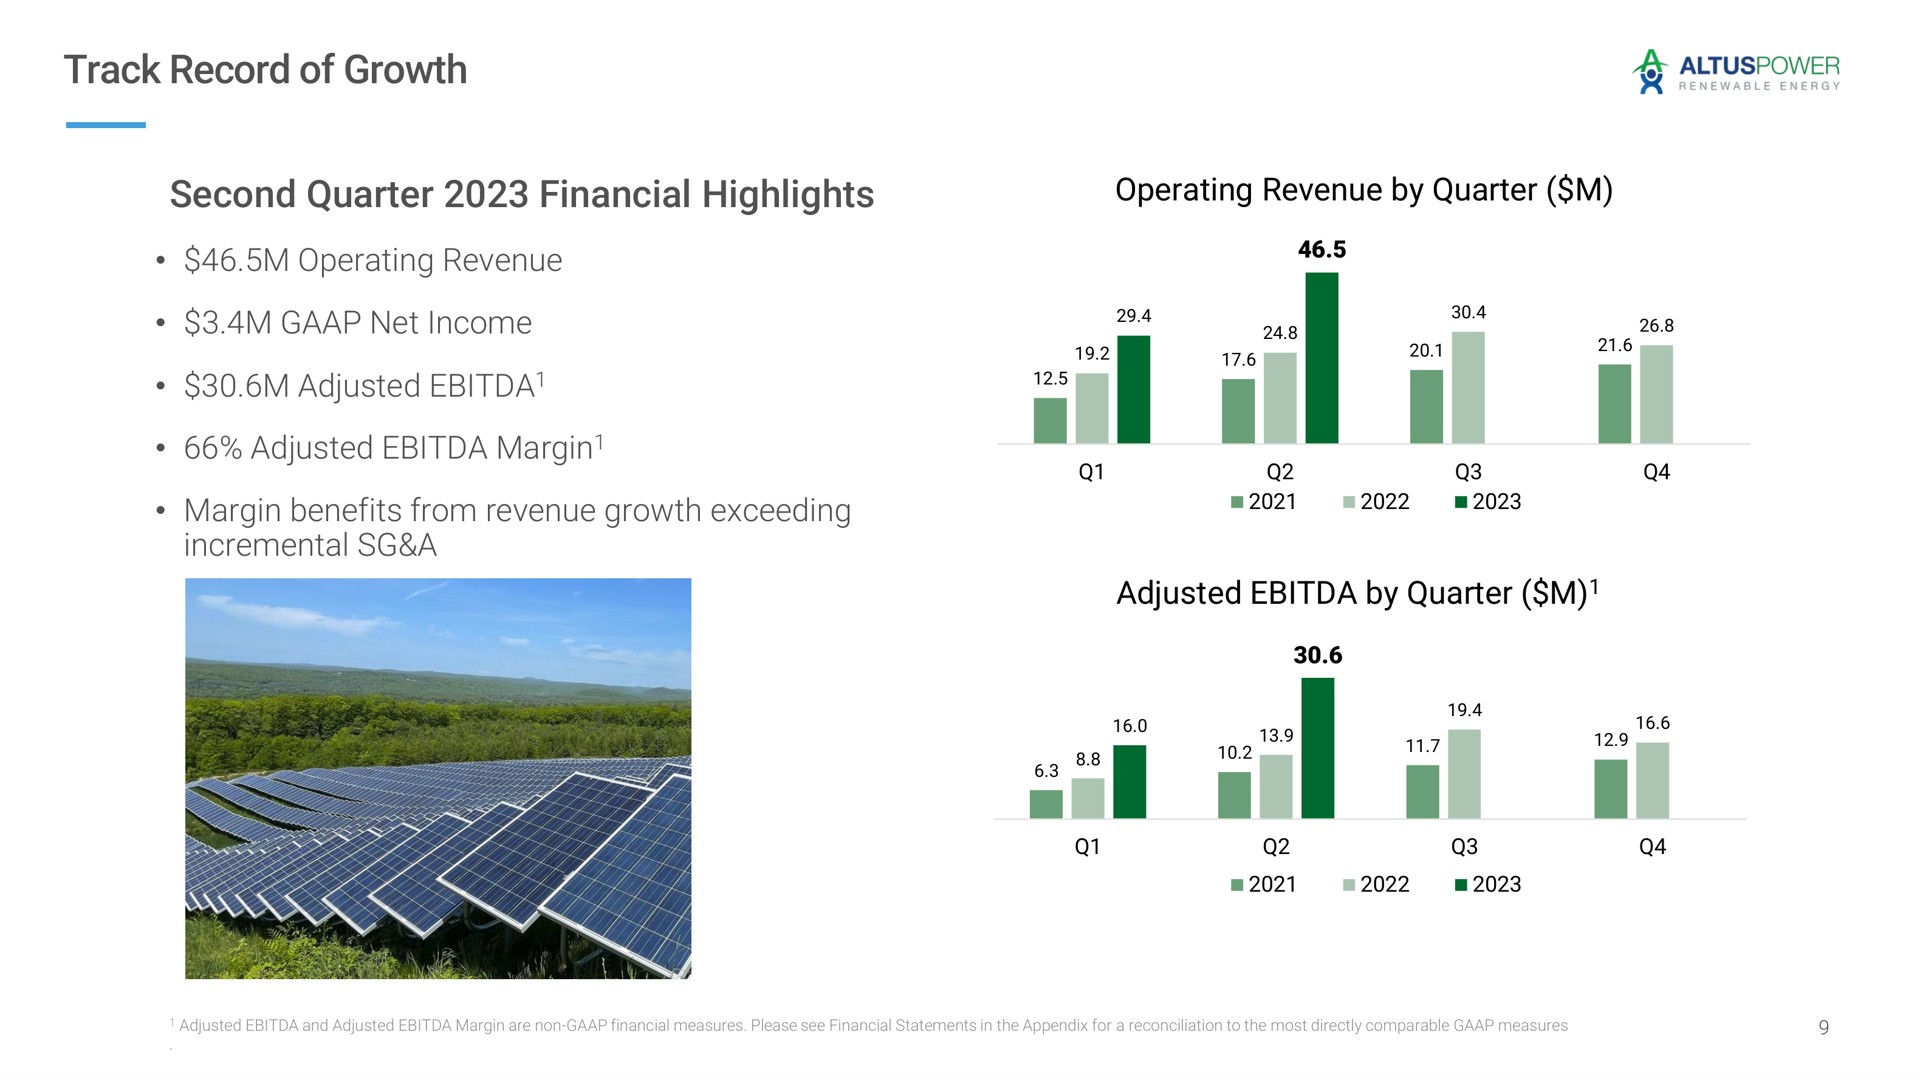 track record of growth second quarter financial highlights operating revenue by quarter operating revenue net income adjusted adjusted margin margin benefits from revenue growth exceeding incremental a adjusted by quarter cue | Altus Power